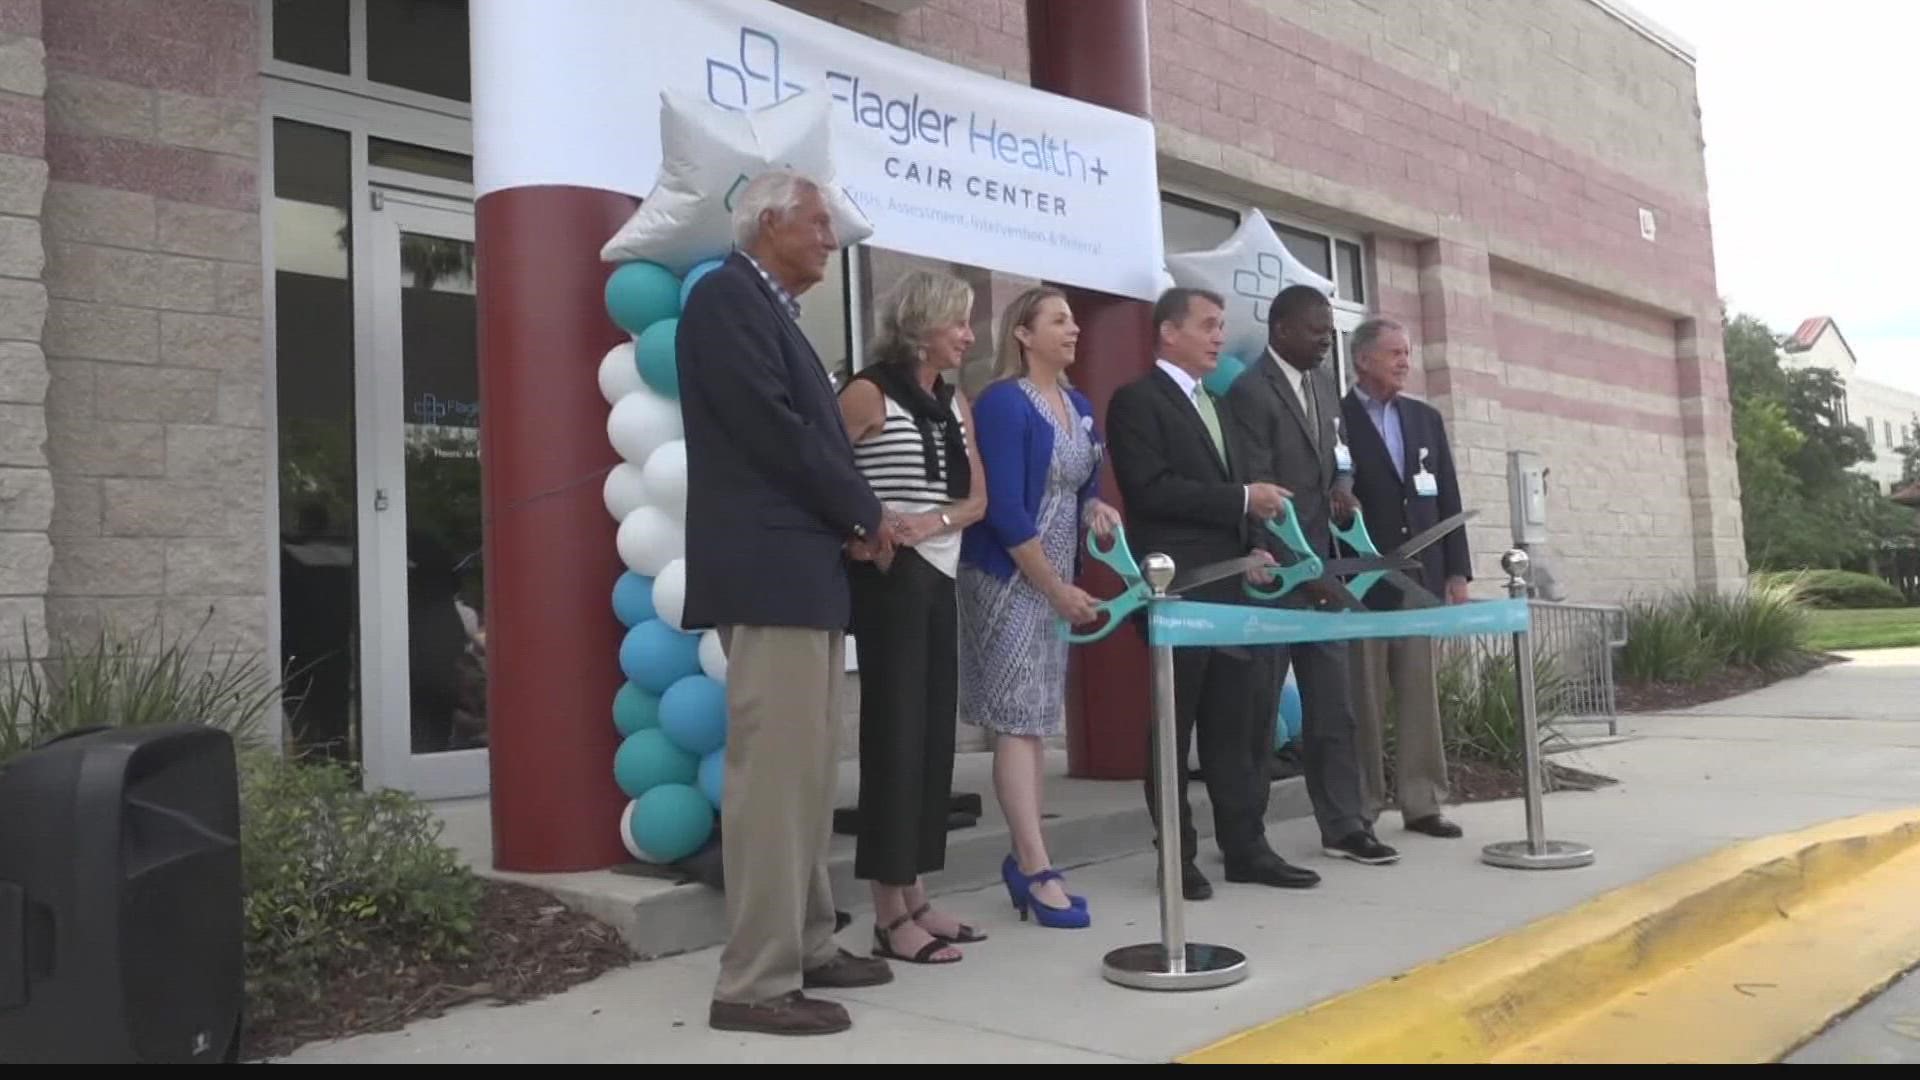 Flagler Health expands their mental health services. CAIR stands for crisis, assessment, intervention and referral. Now adults and kids can get the help they need.